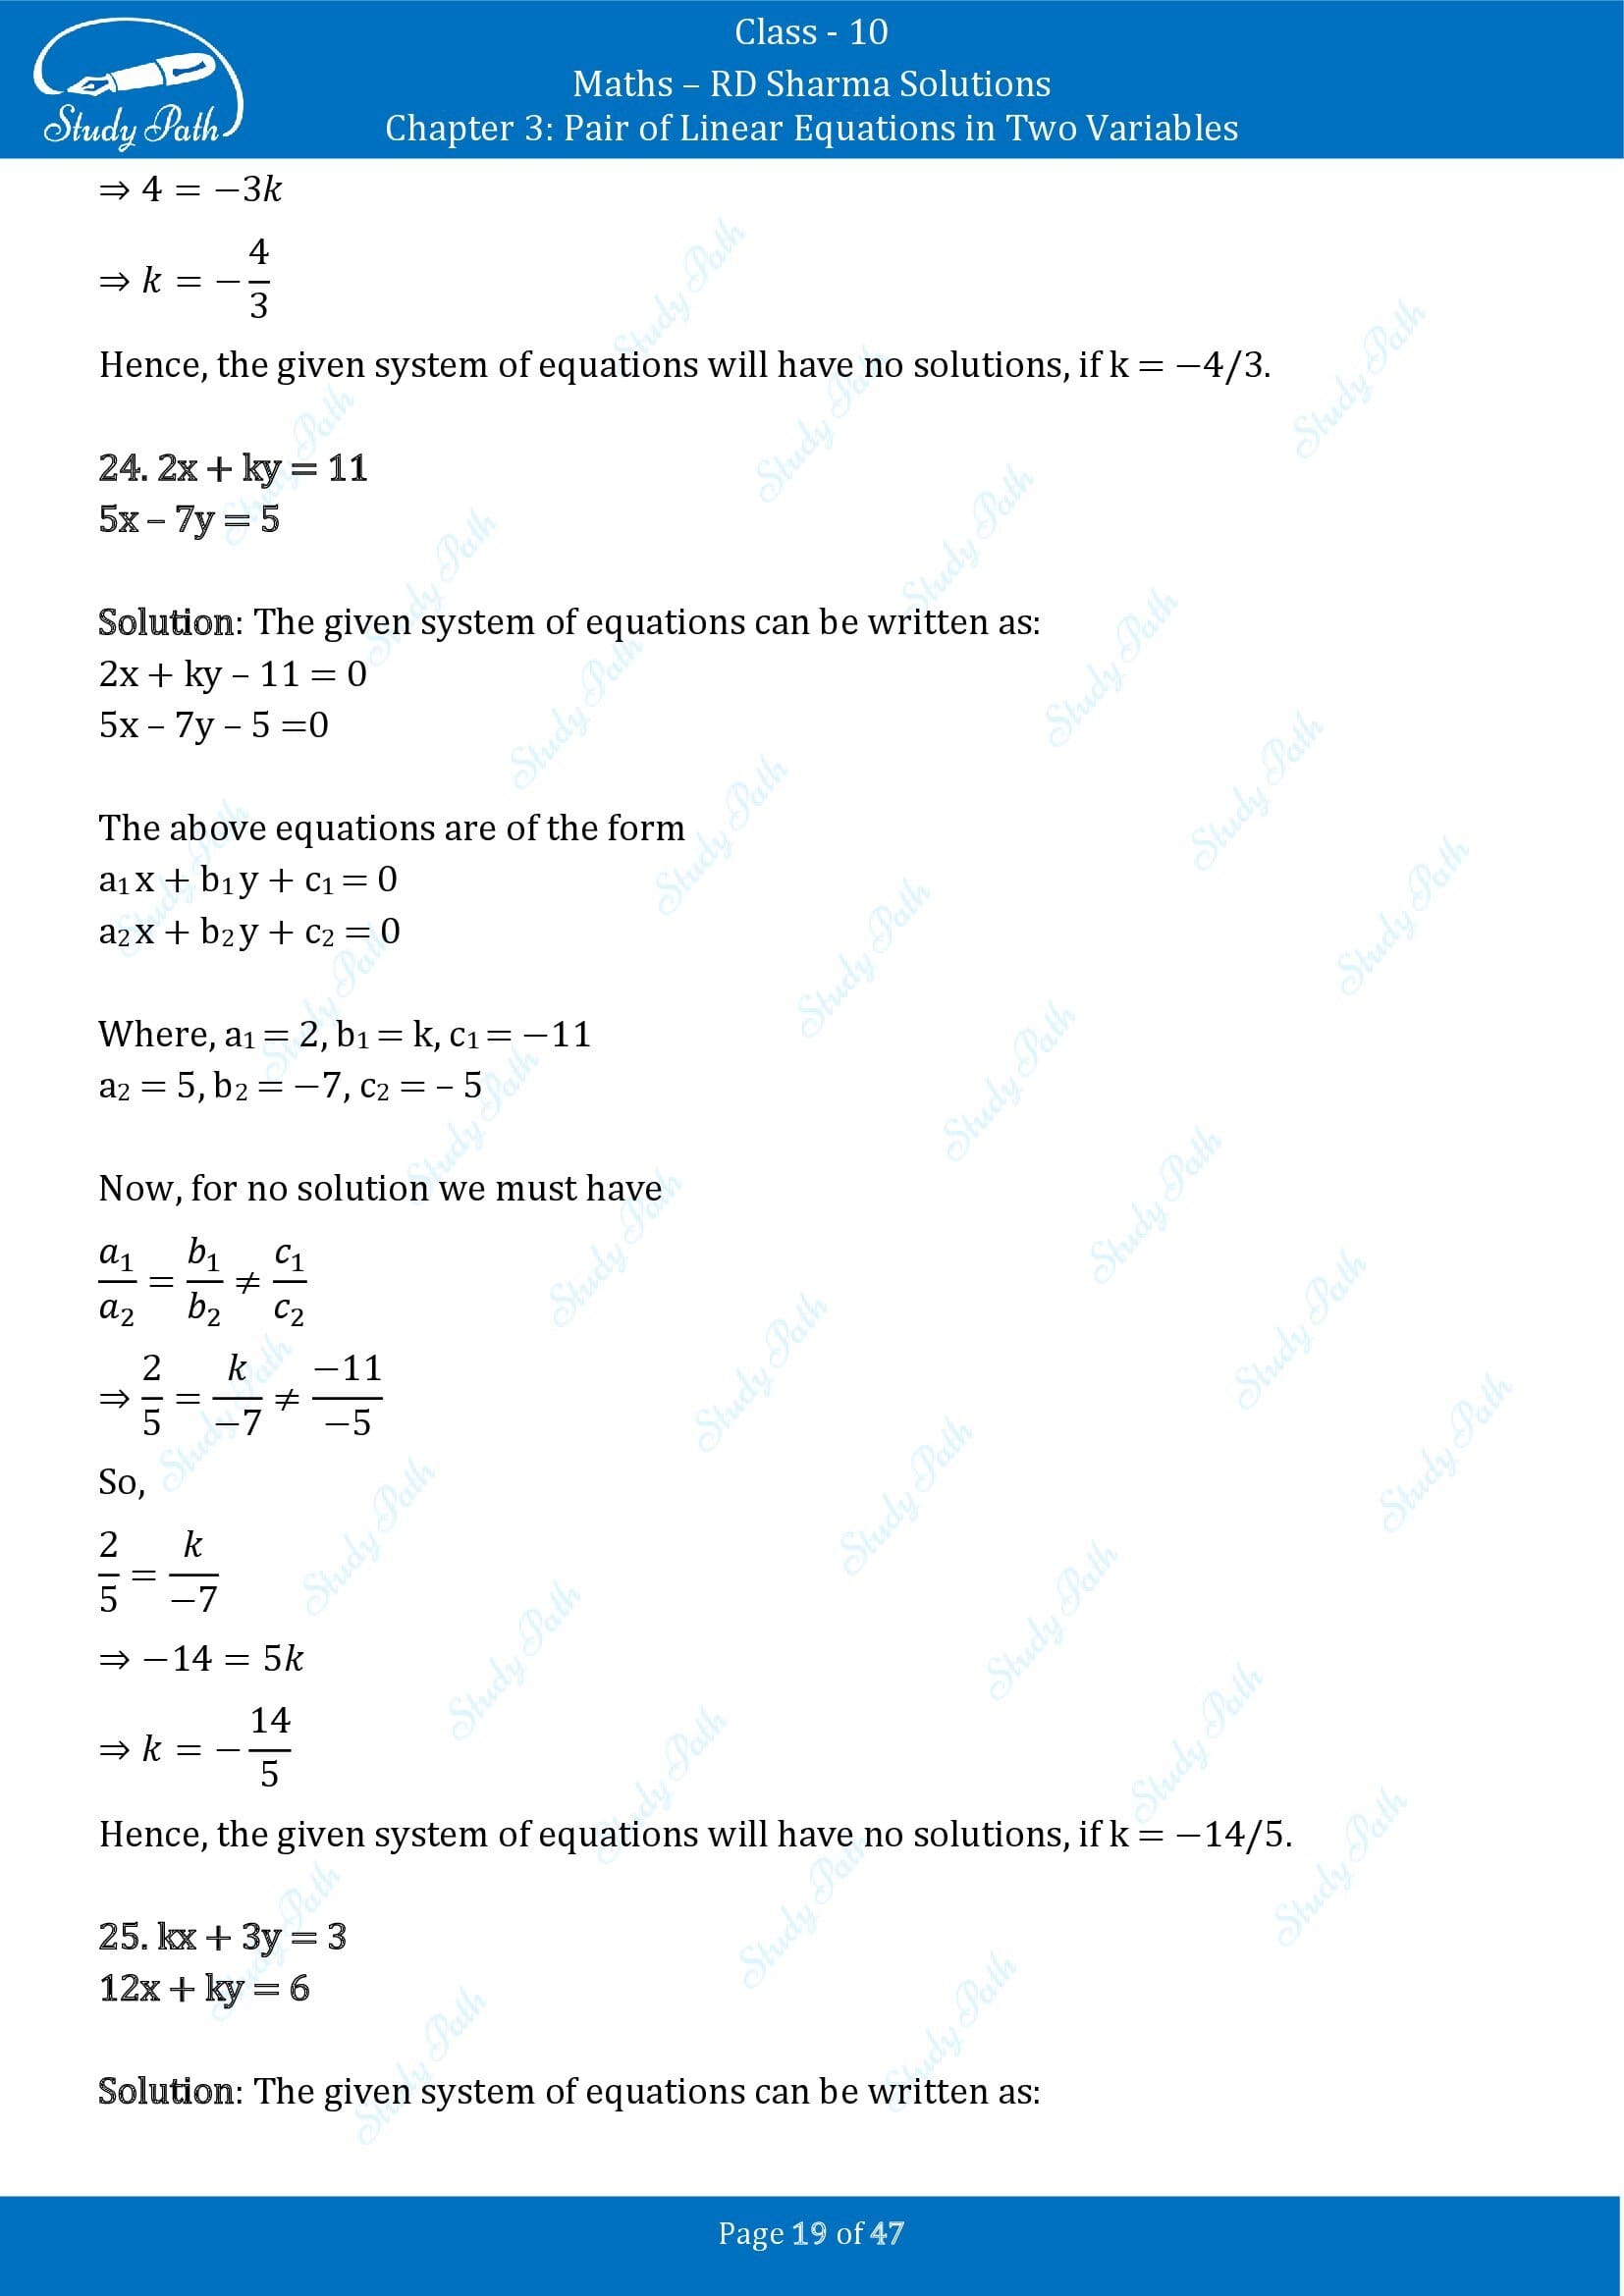 RD Sharma Solutions Class 10 Chapter 3 Pair of Linear Equations in Two Variables Exercise 3.5 00019